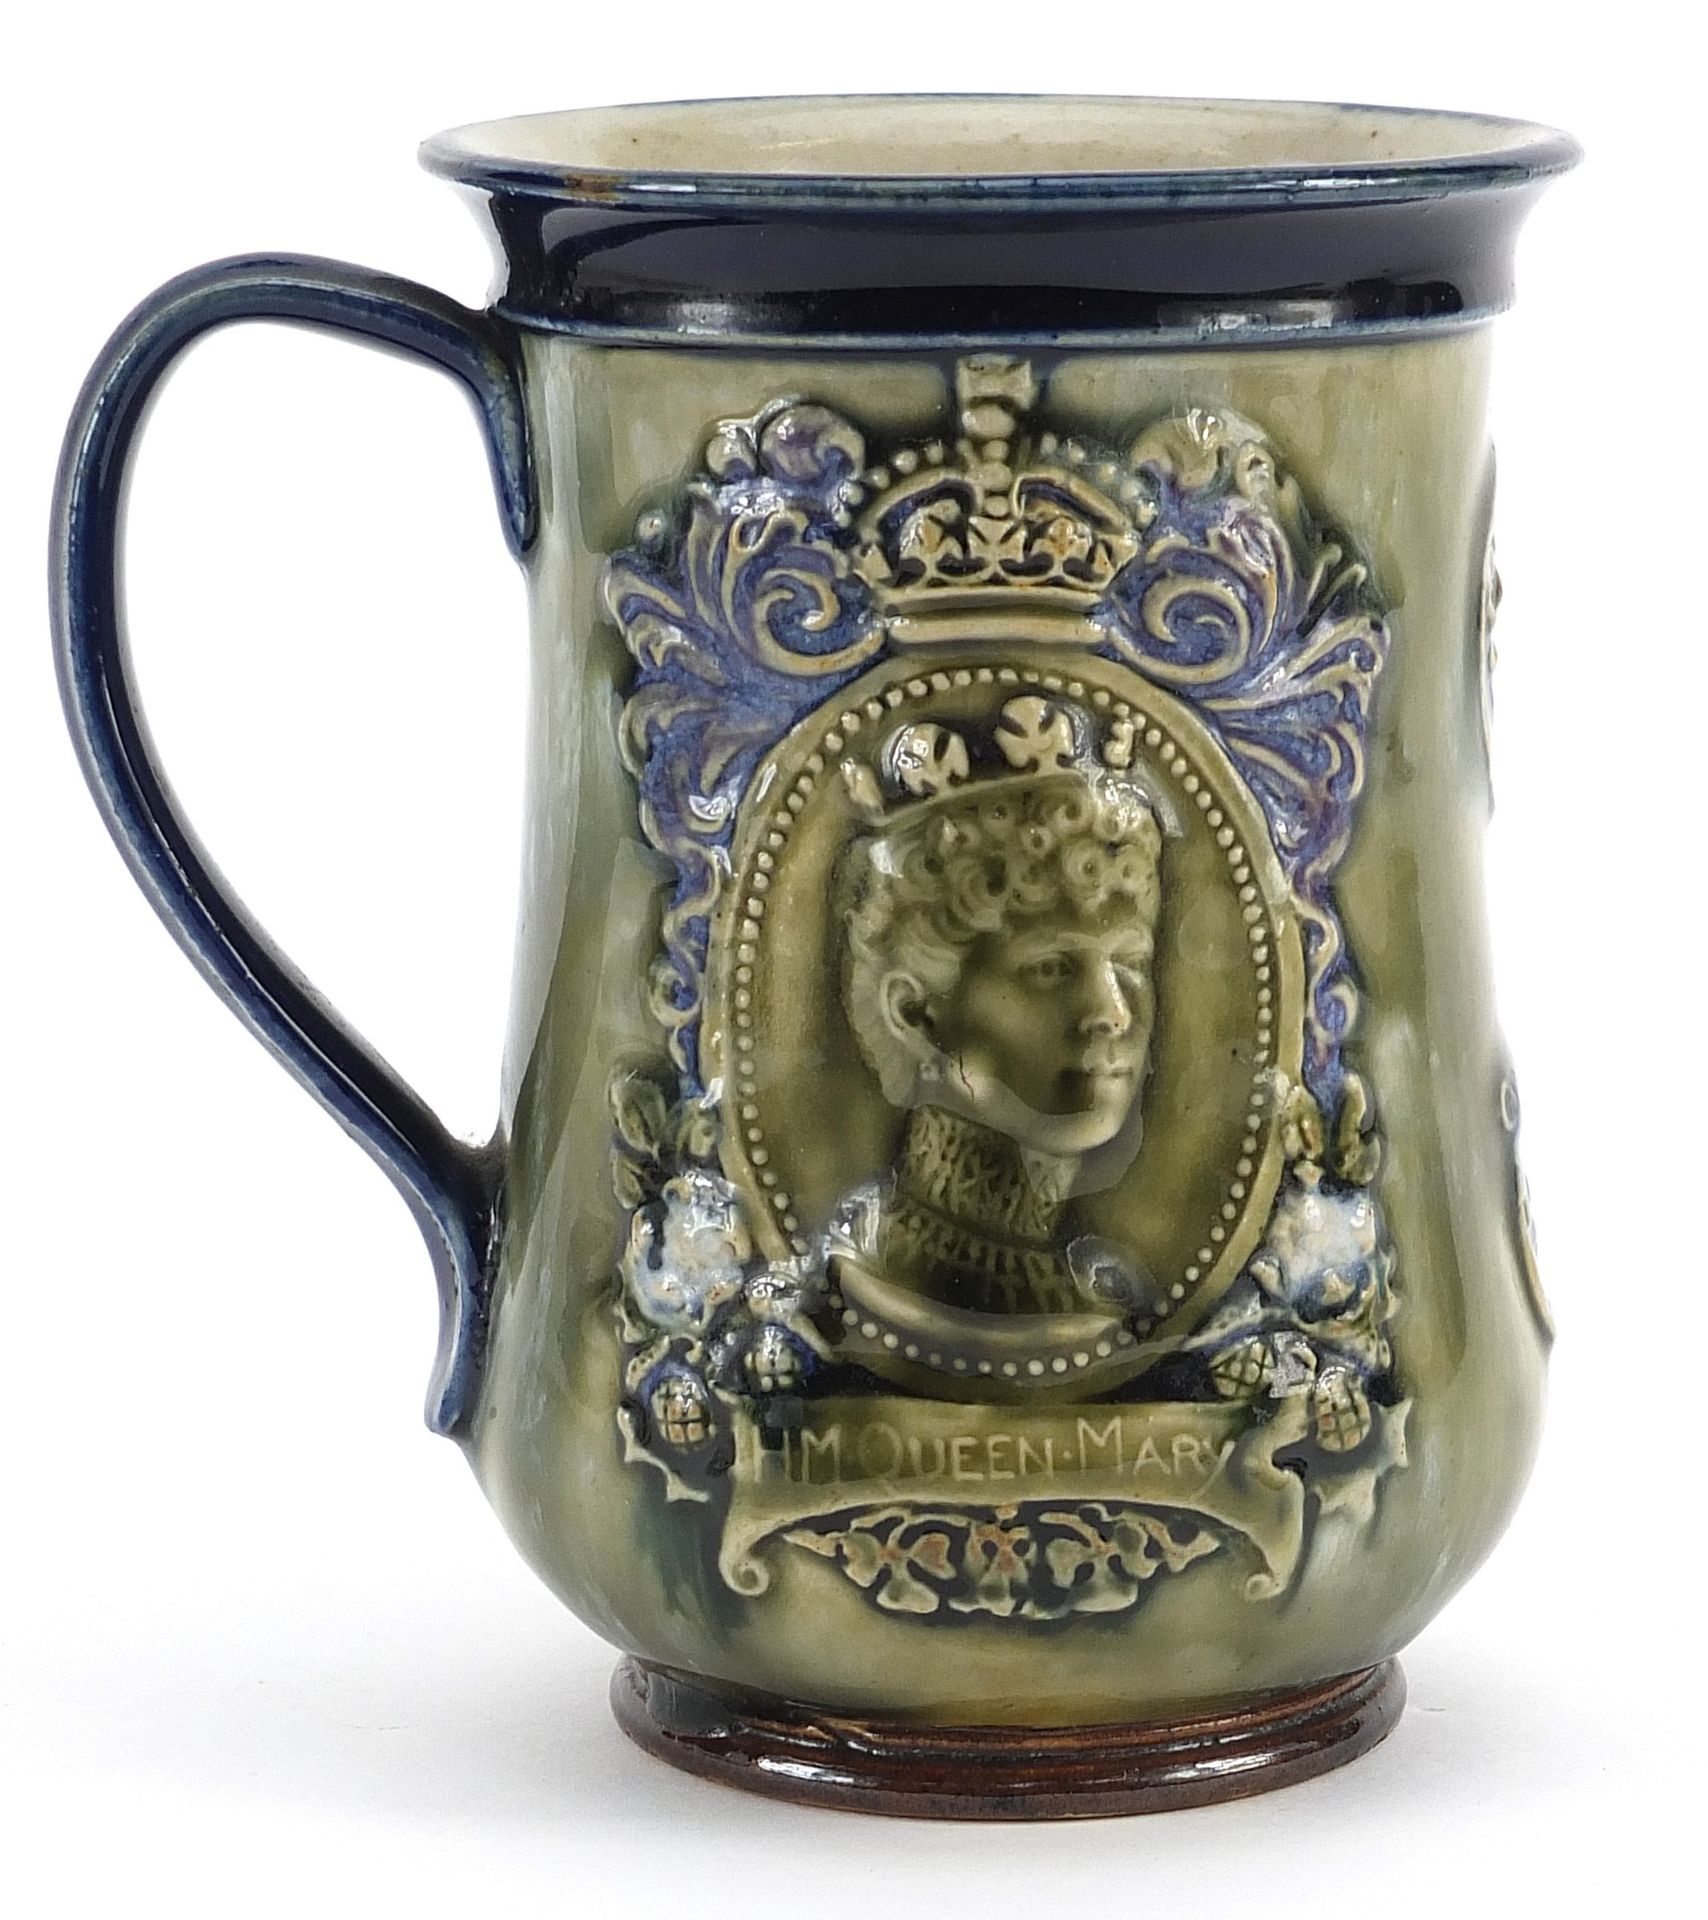 Royal Doulton stoneware mug commemorating the coronation of HM Queen Mary and HM King George V 1911, - Image 4 of 6